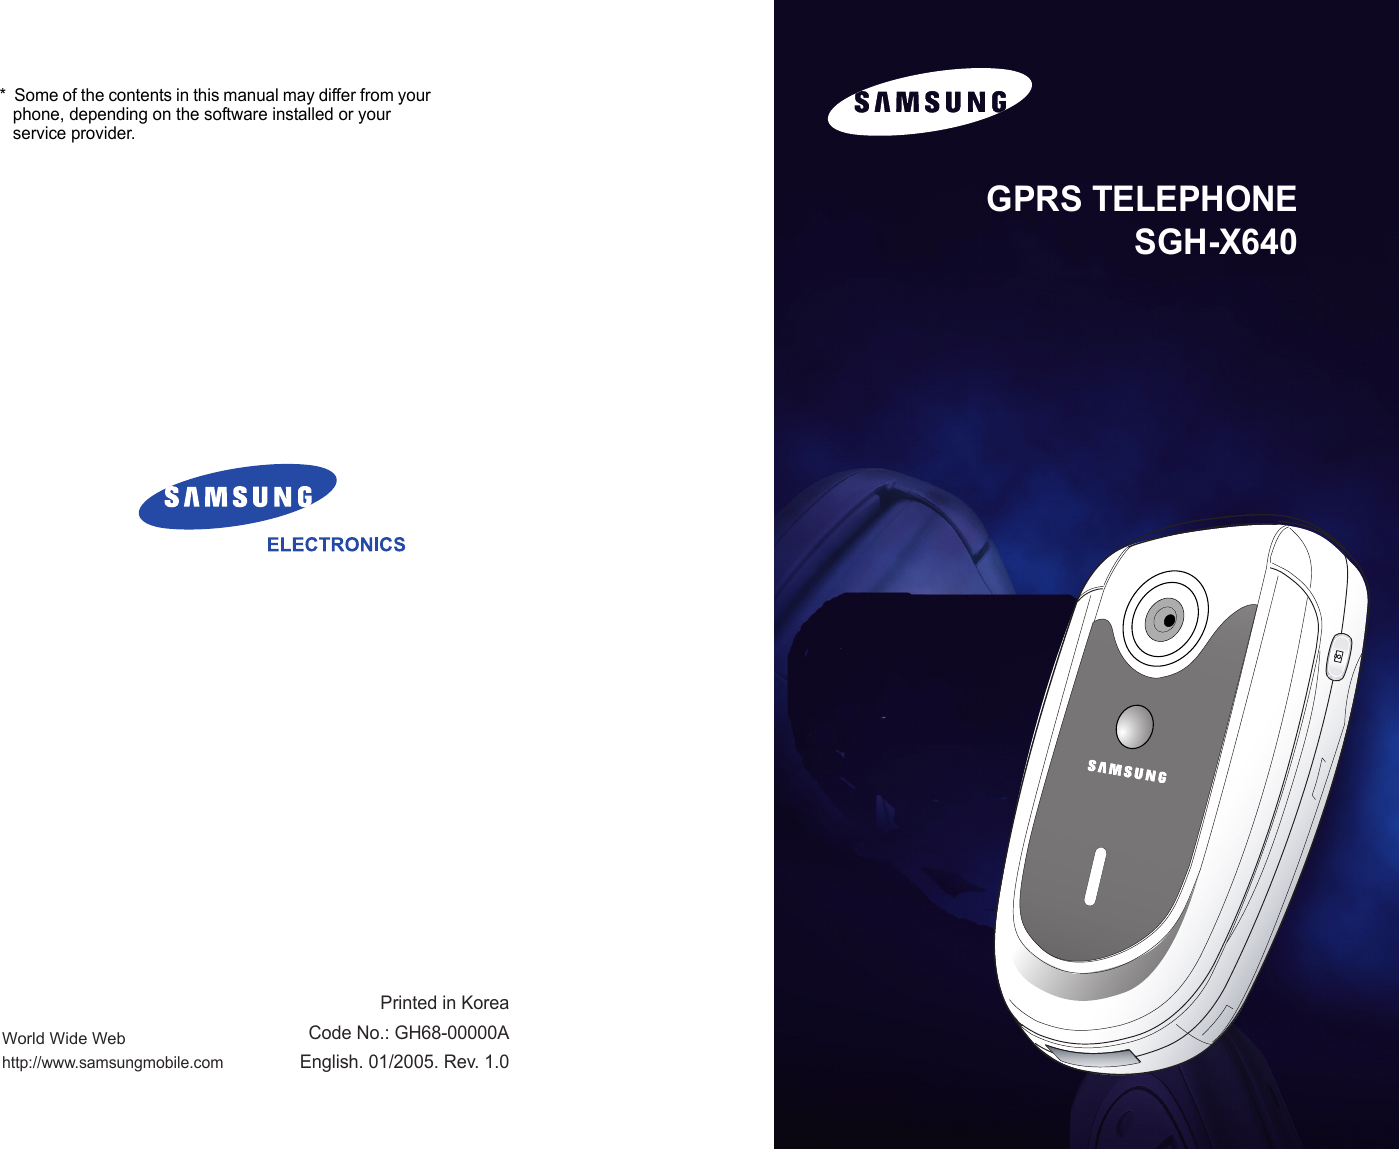 World Wide Webhttp://www.samsungmobile.comPrinted in KoreaCode No.: GH68-00000AEnglish. 01/2005. Rev. 1.0*  Some of the contents in this manual may differ from your phone, depending on the software installed or your service provider.GPRS TELEPHONESGH-X640